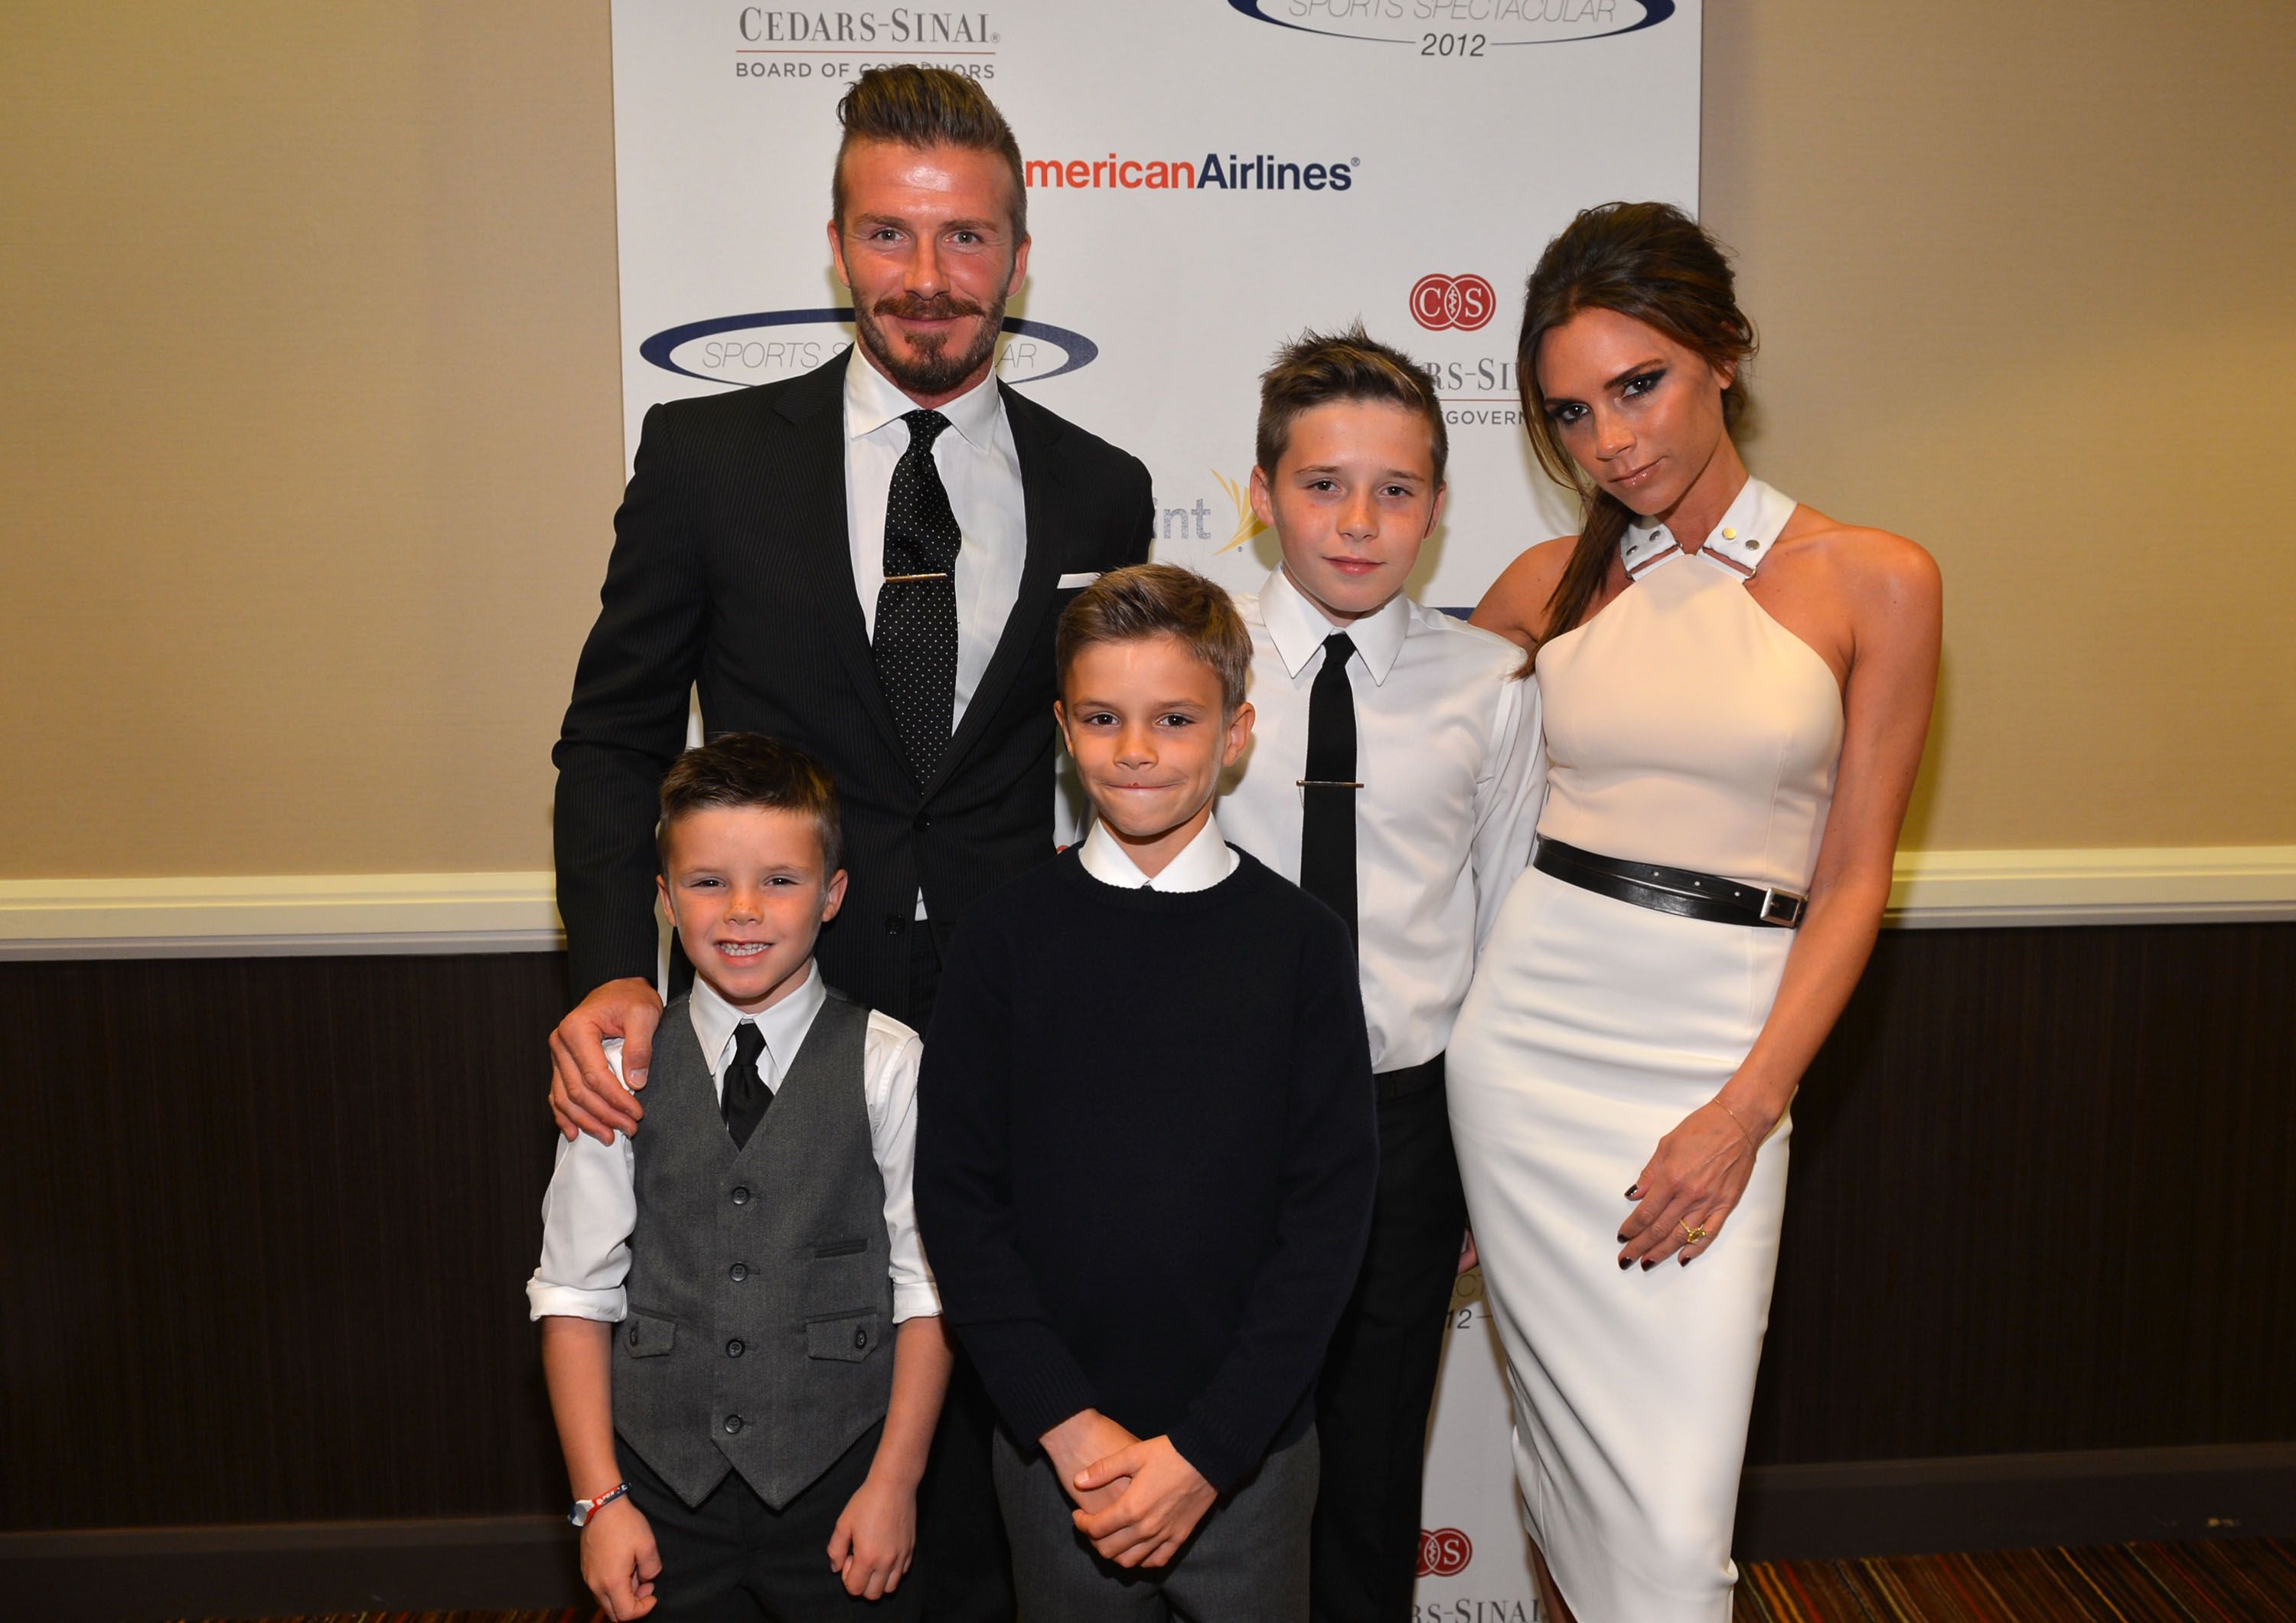 David Beckham, Victoria Beckham and their sons Cruz, Romeo and Brooklyn Beckham during the 27th Anniversary Sports Spectacular benefiting Cedars-Sinai Medical Genetics Institute at the Hyatt Regency Century Plaza on May 20, 2012 in Century City, California. | Source: Getty Images